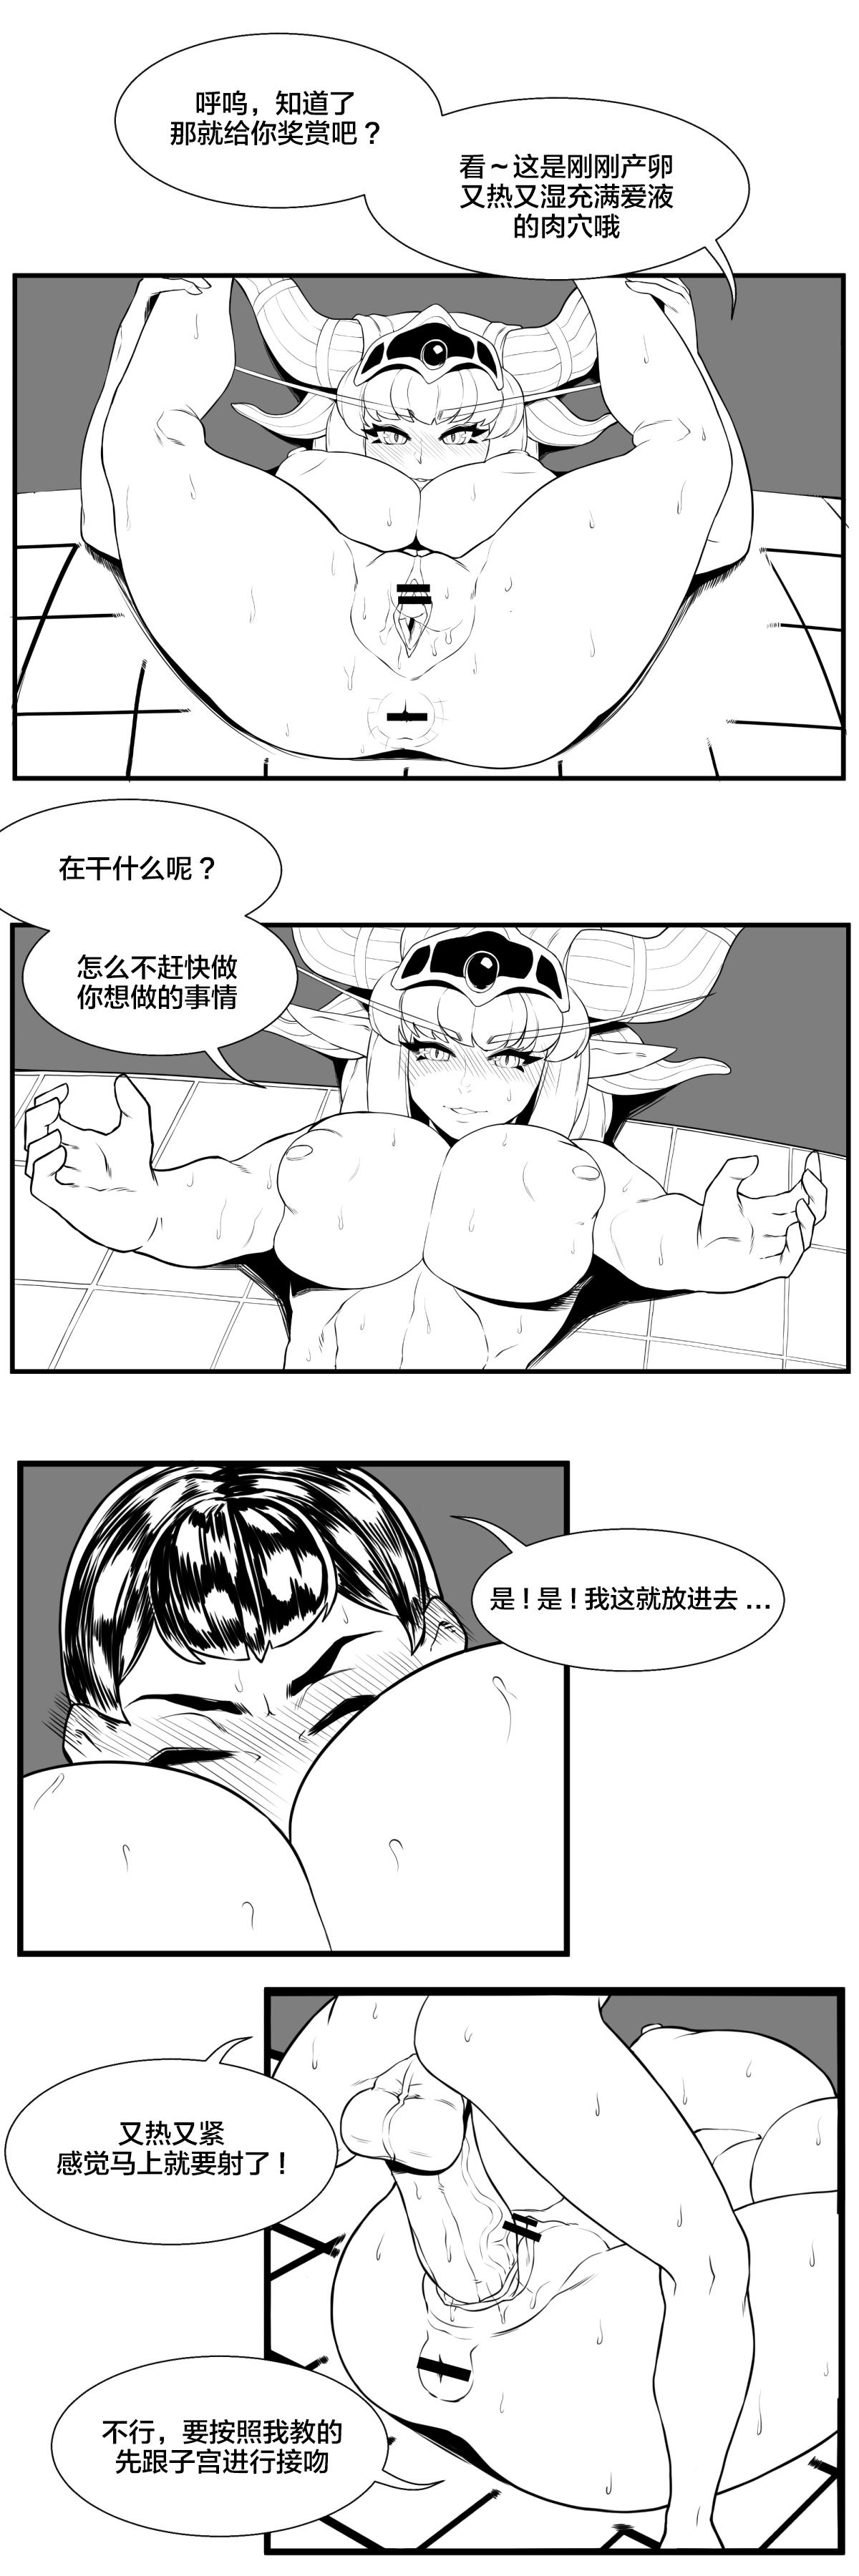 Boy Girl 용엄마와 비밀상담 - World of warcraft Cosplay - Page 6